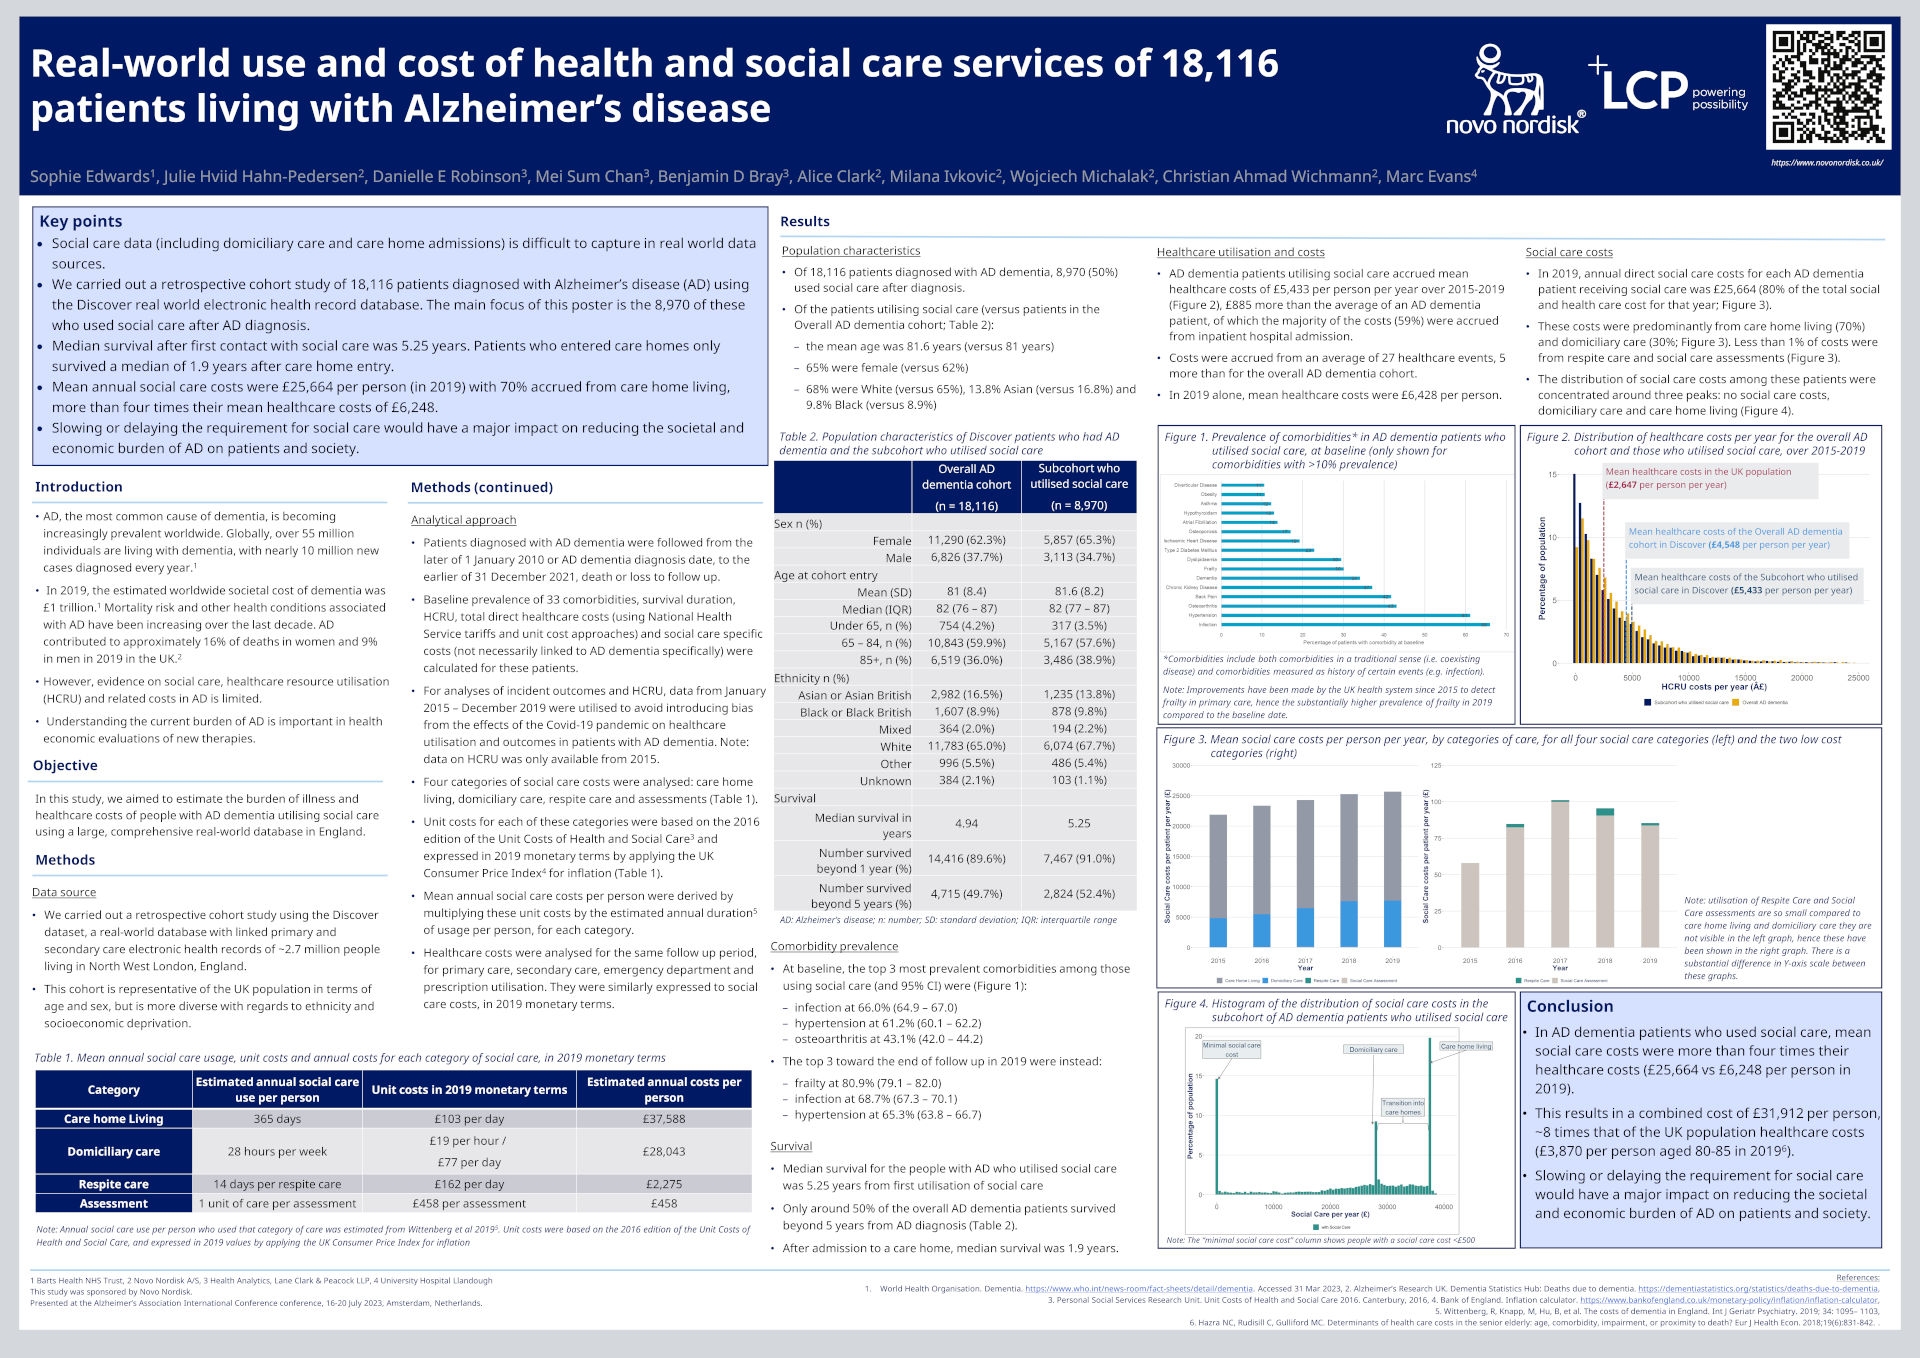 Real-world use and cost of health and social care services of 18,116 patients living with Alzheimer’s disease -  Poster